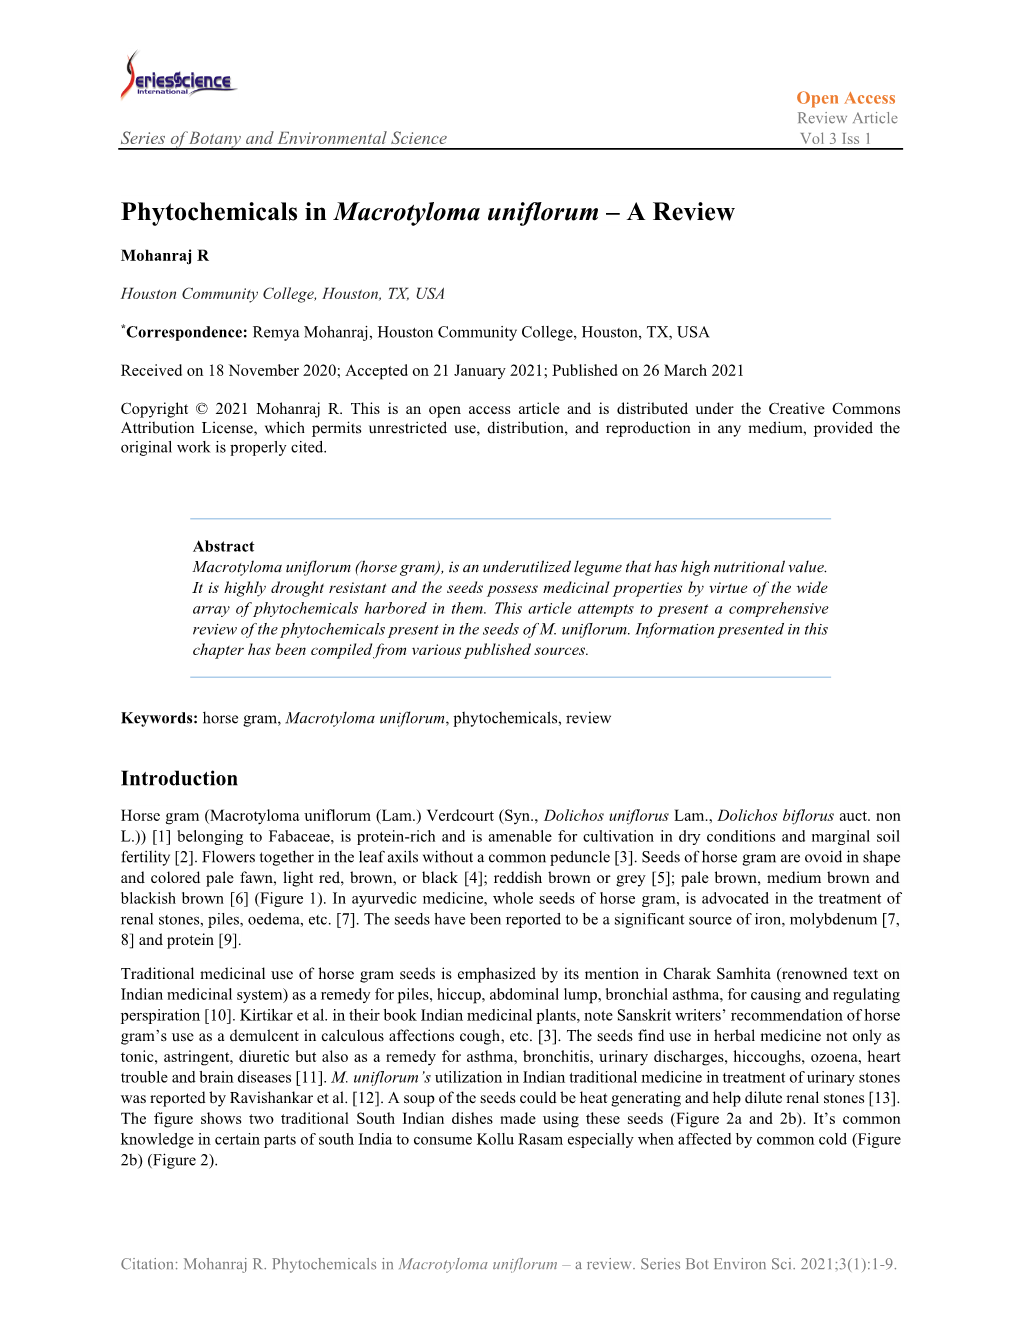 Phytochemicals in Macrotyloma Uniflorum – a Review